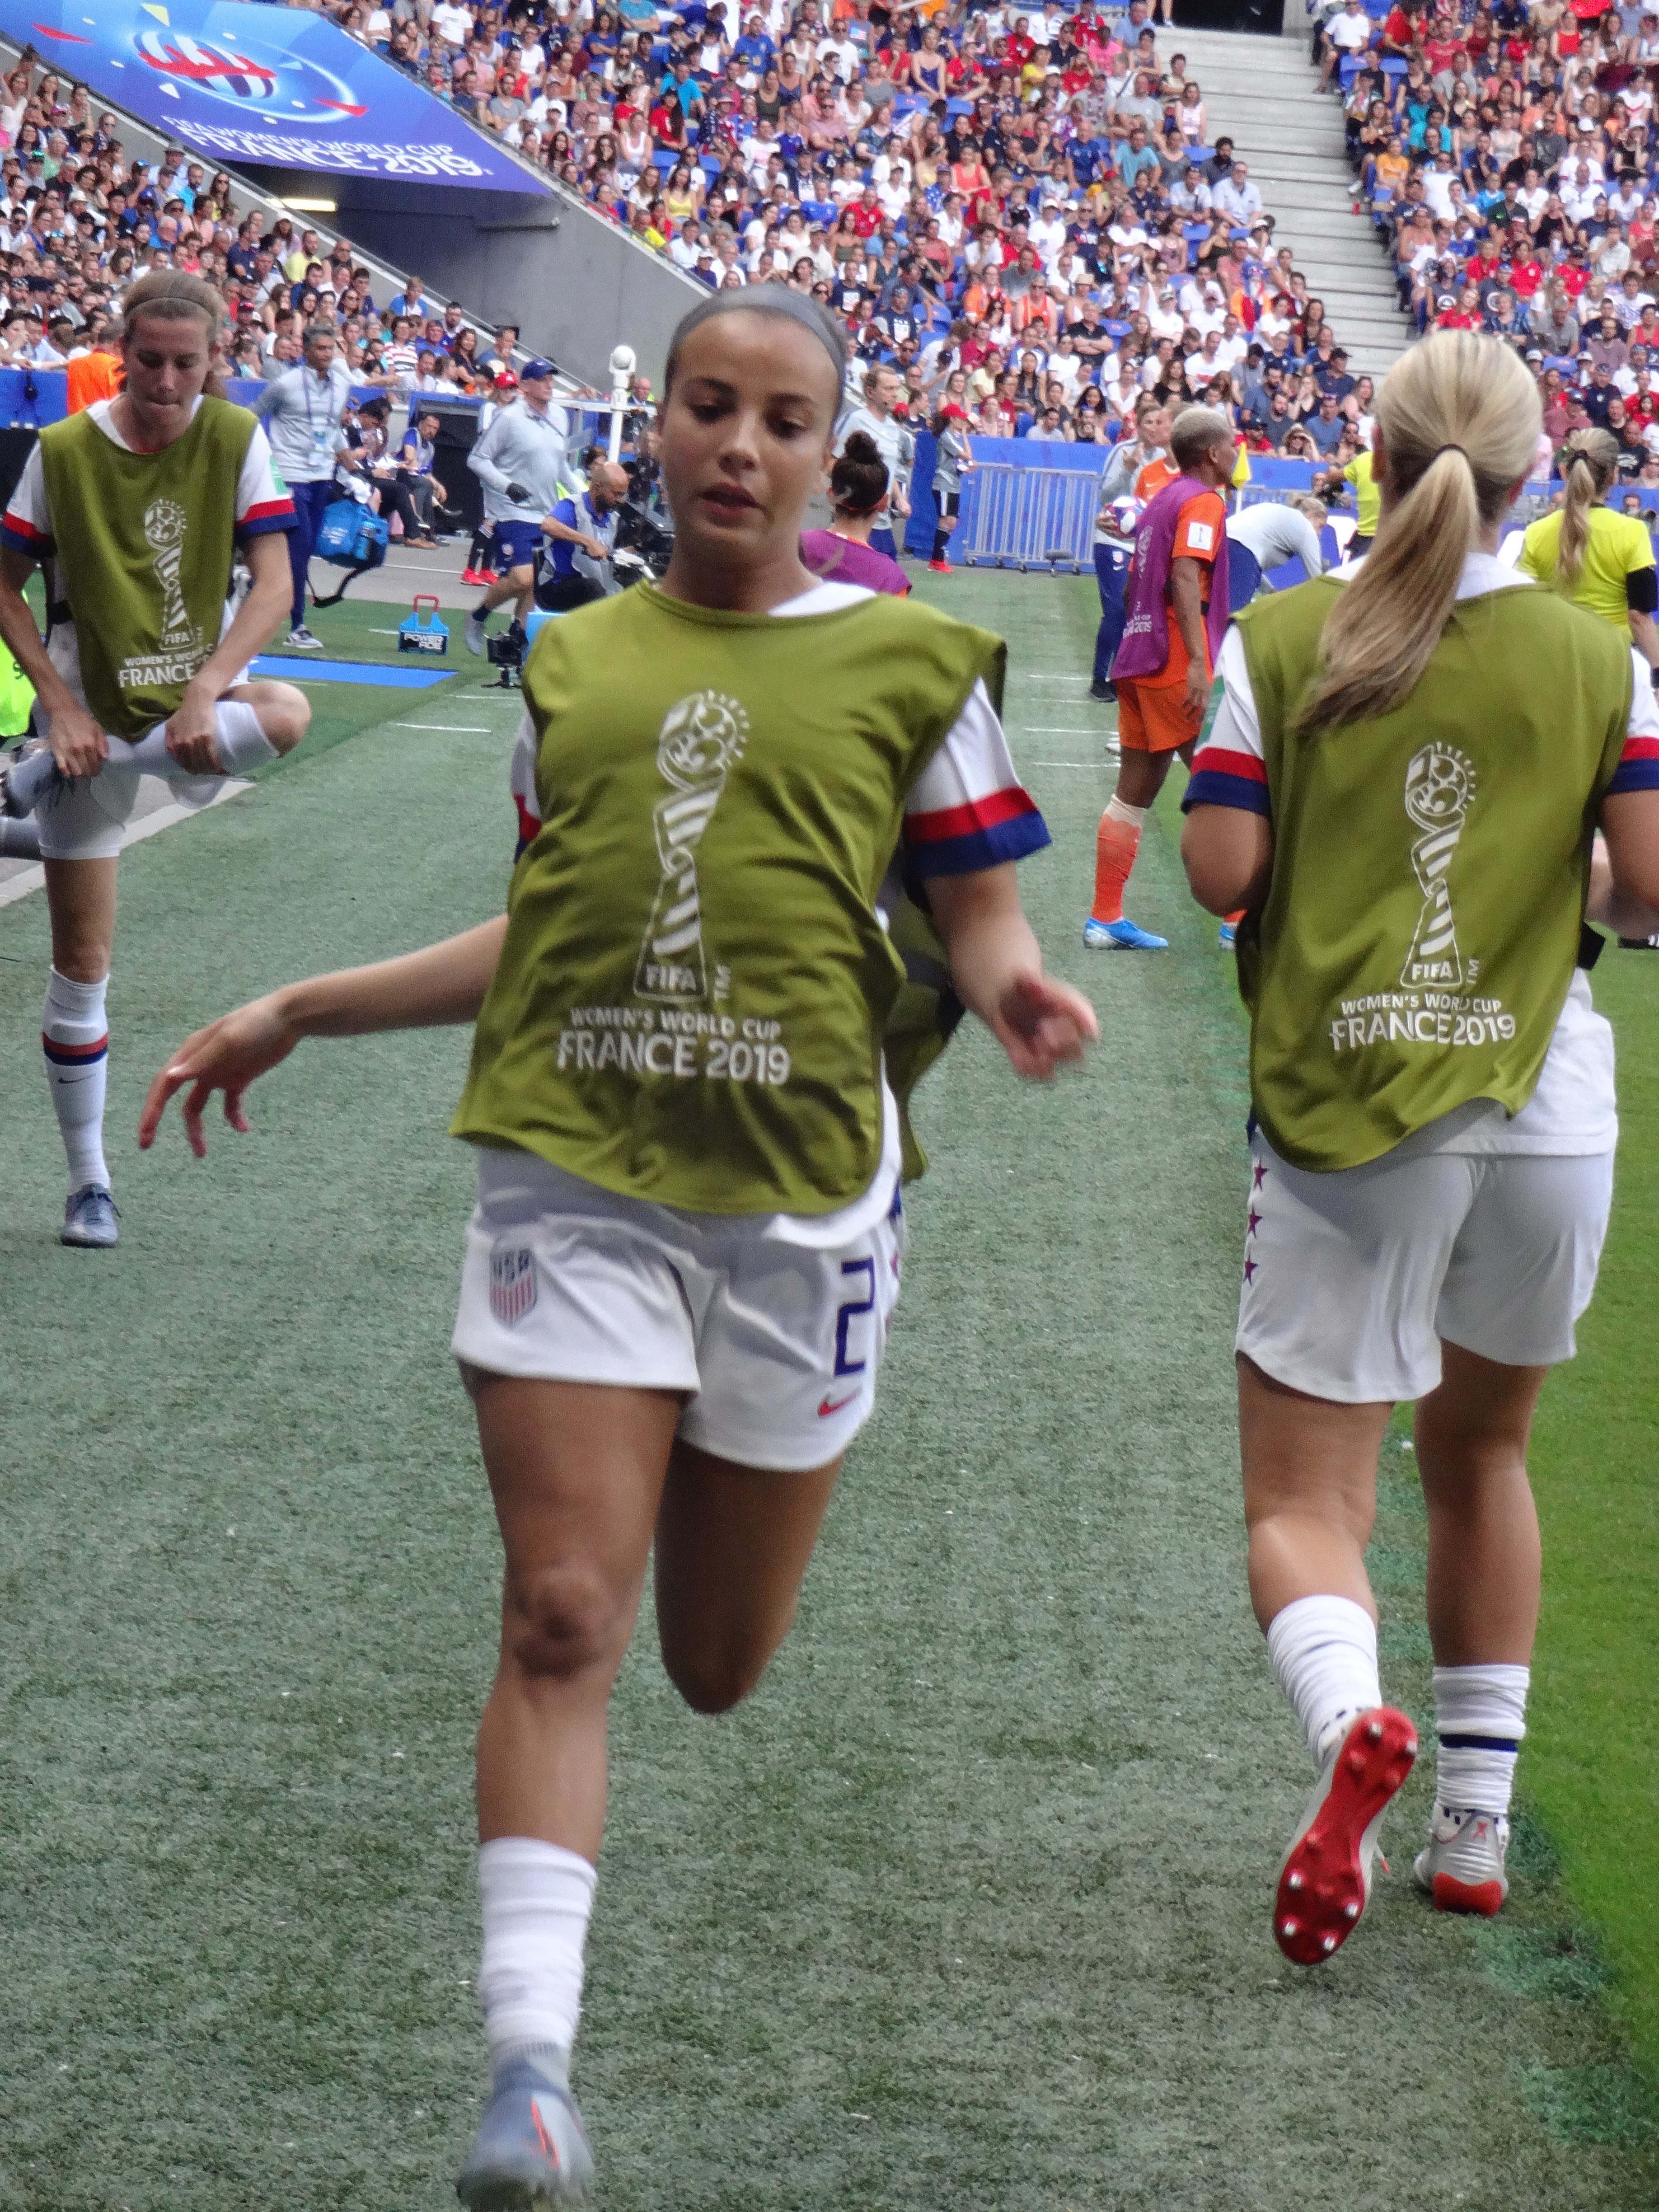 File:FIFA Women's World Cup 2019 Final - US substitutes warming up (6).jpg - Wikimedia Commons